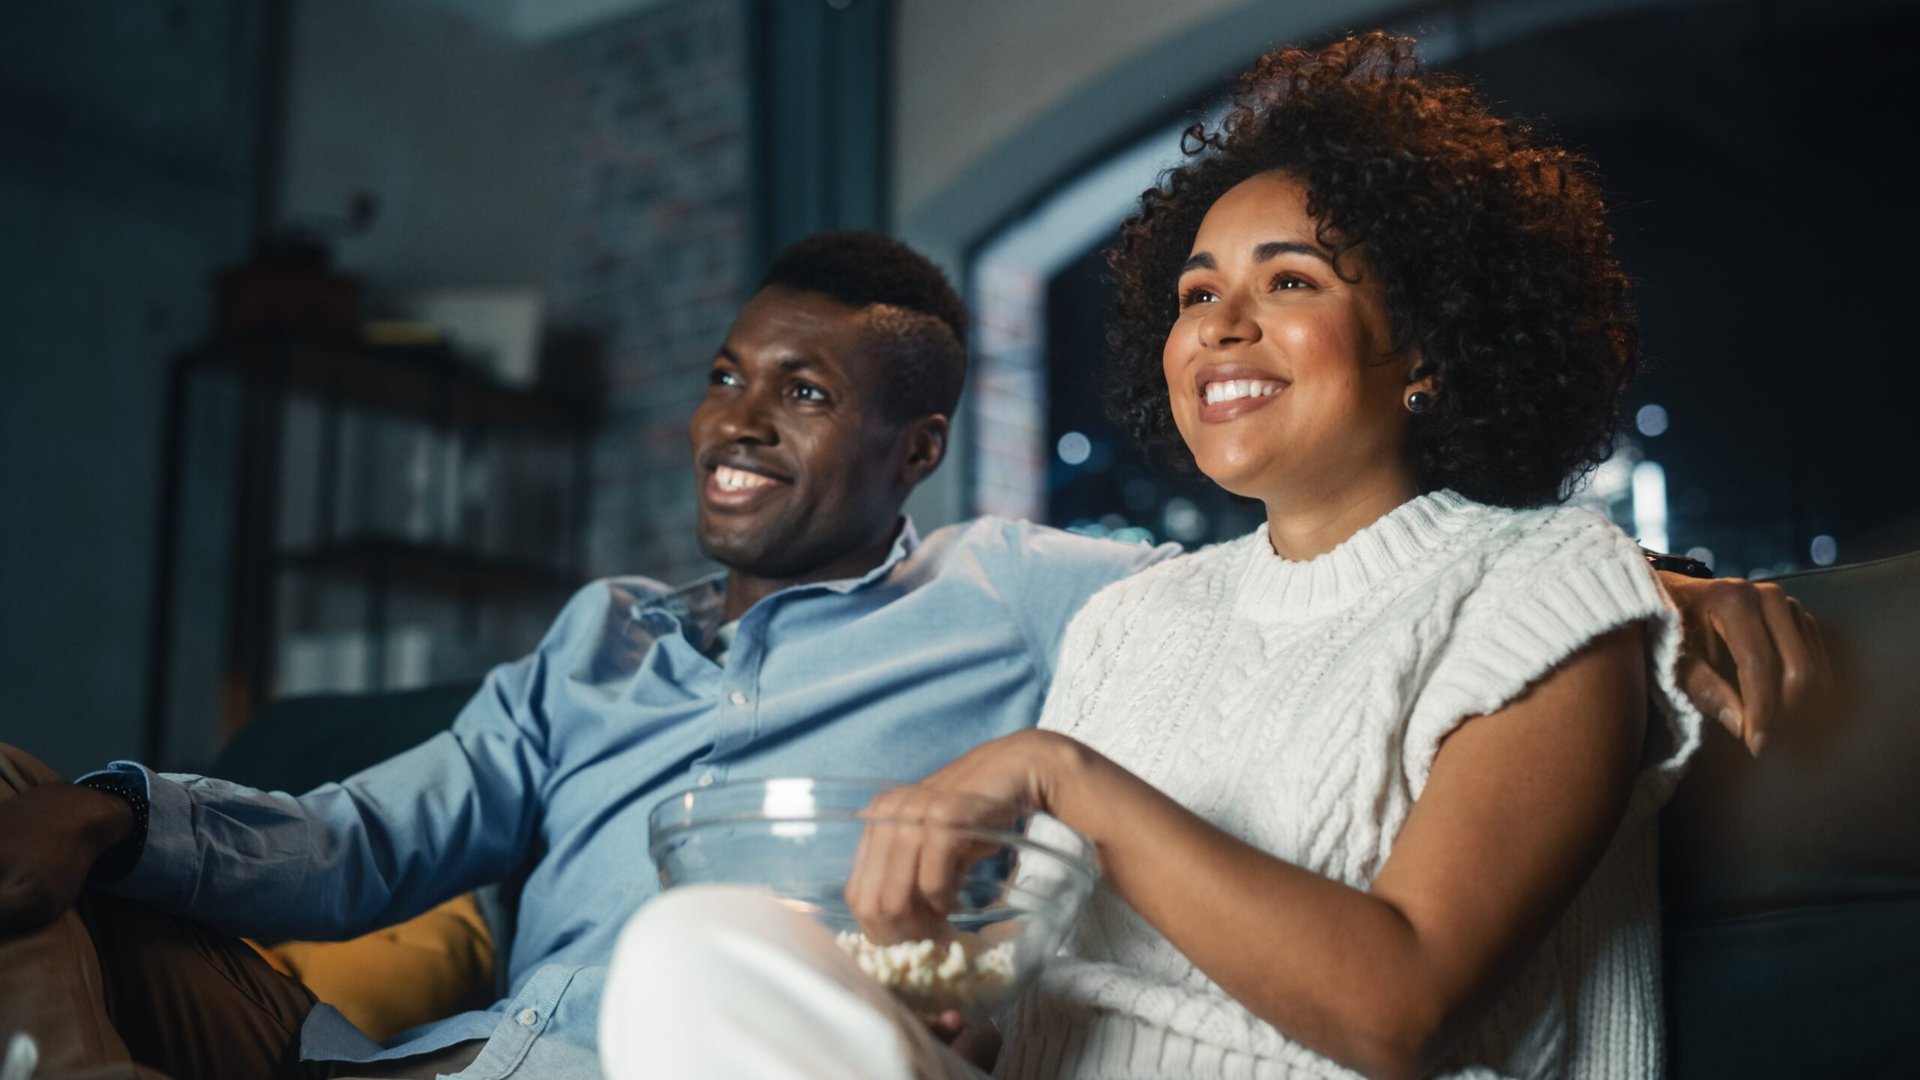 Smiling happy couple watching a movie or TV show on TV with home streaming service or cable while eating popcorn